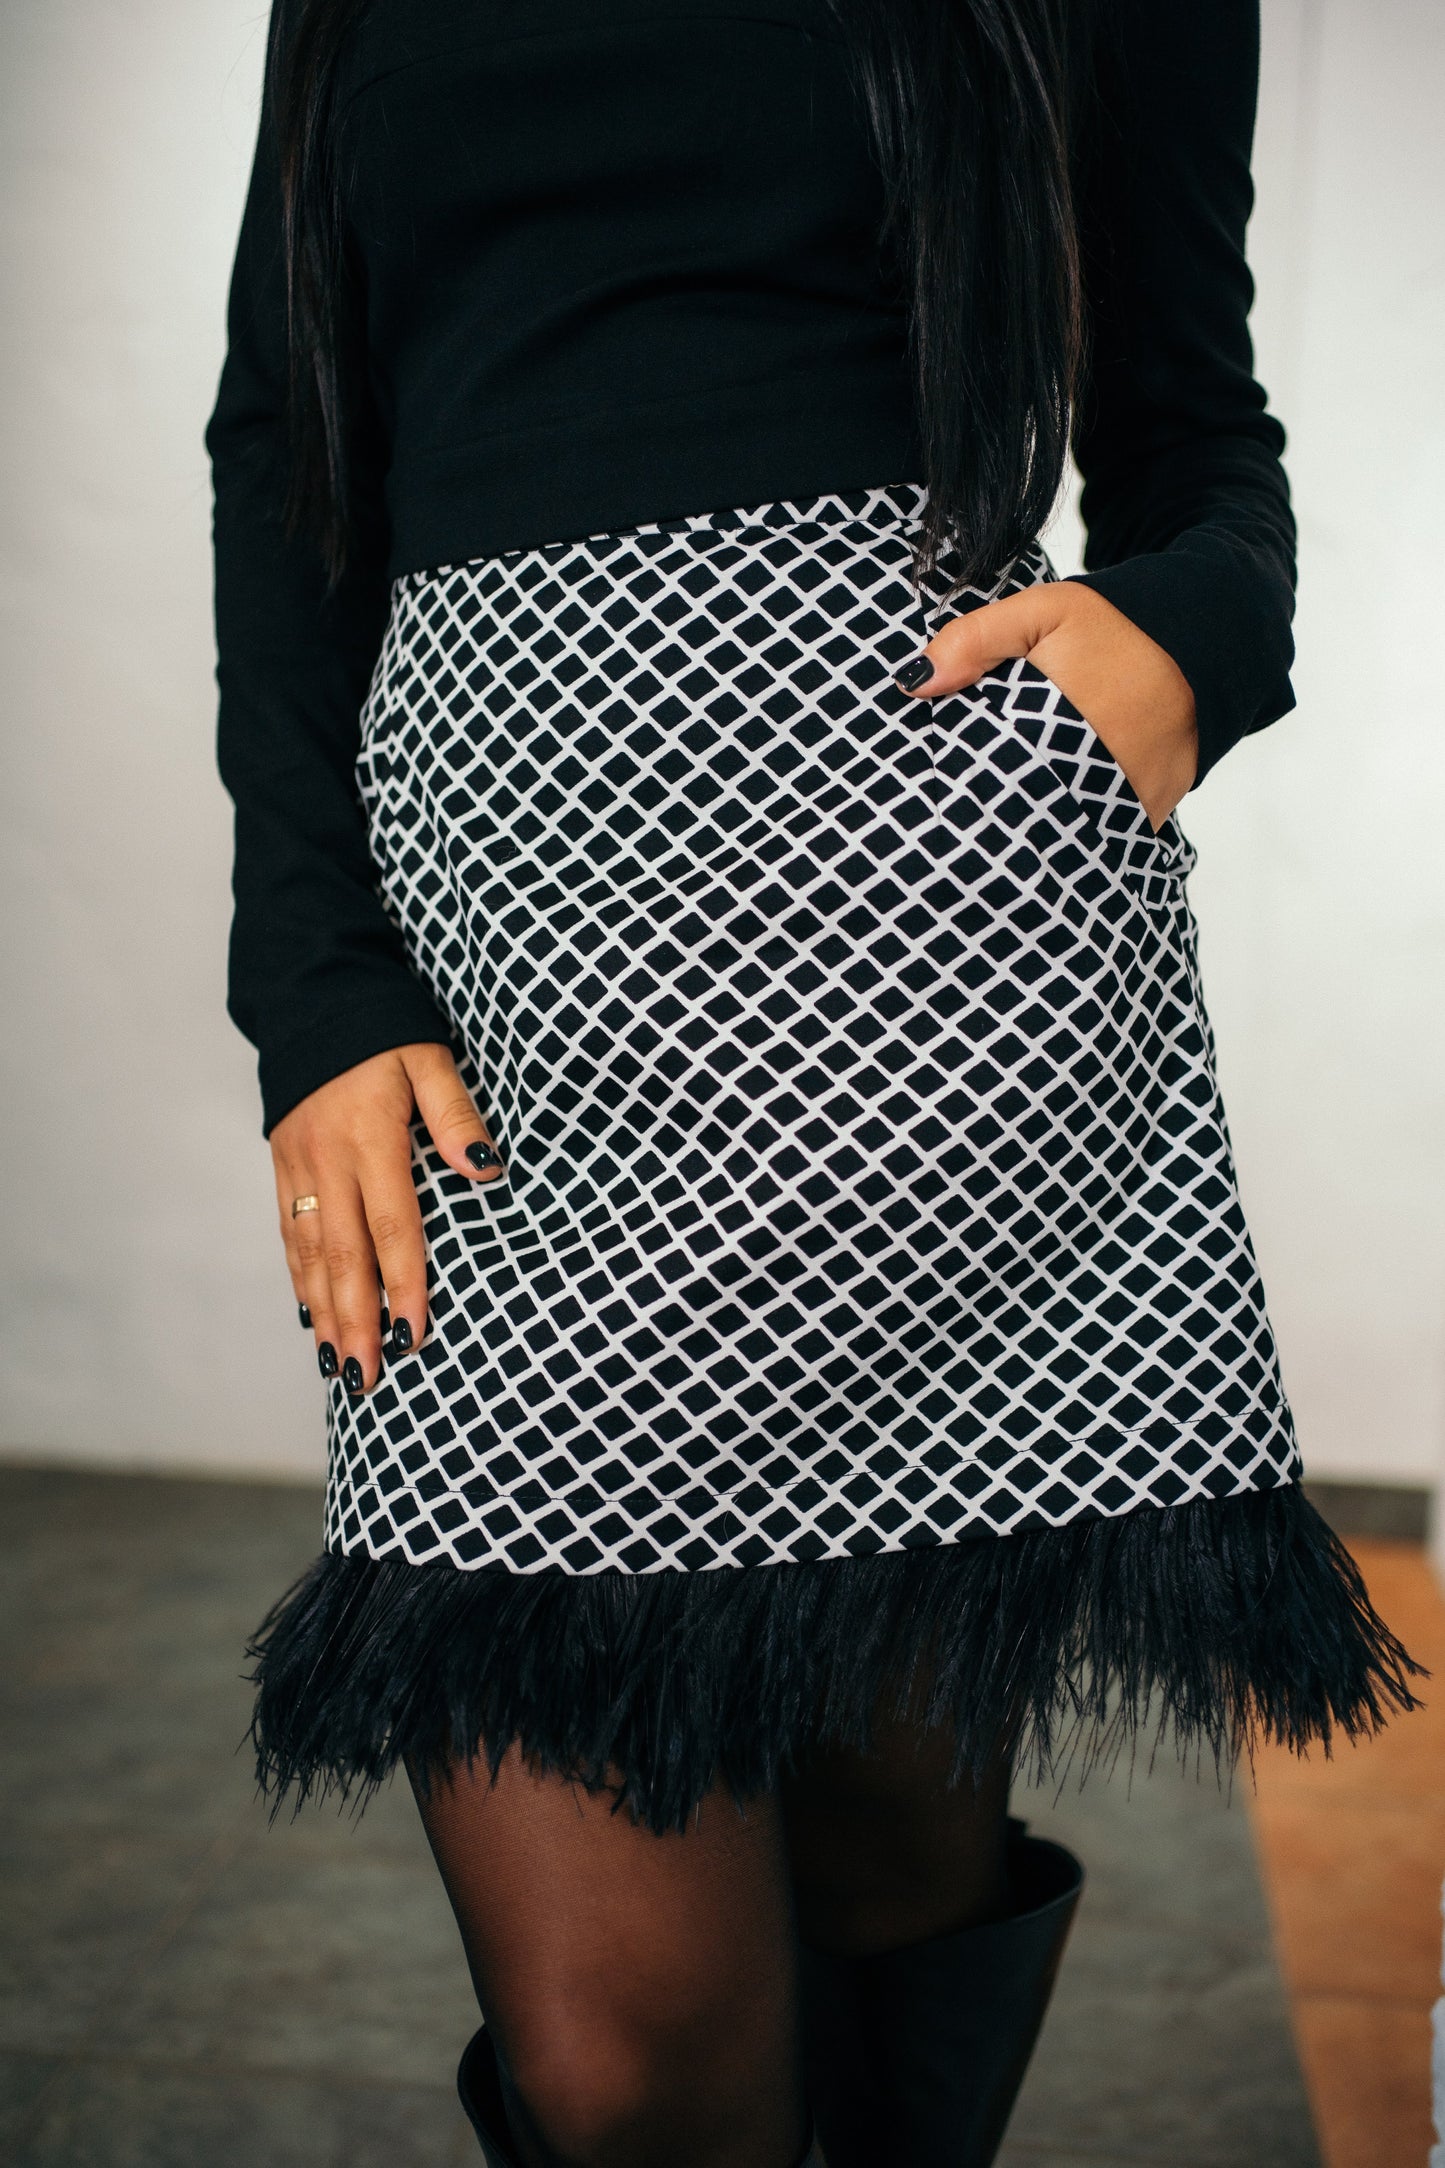 Black and white two-piece dress set of a long-sleeved top and feather skirt with pockets